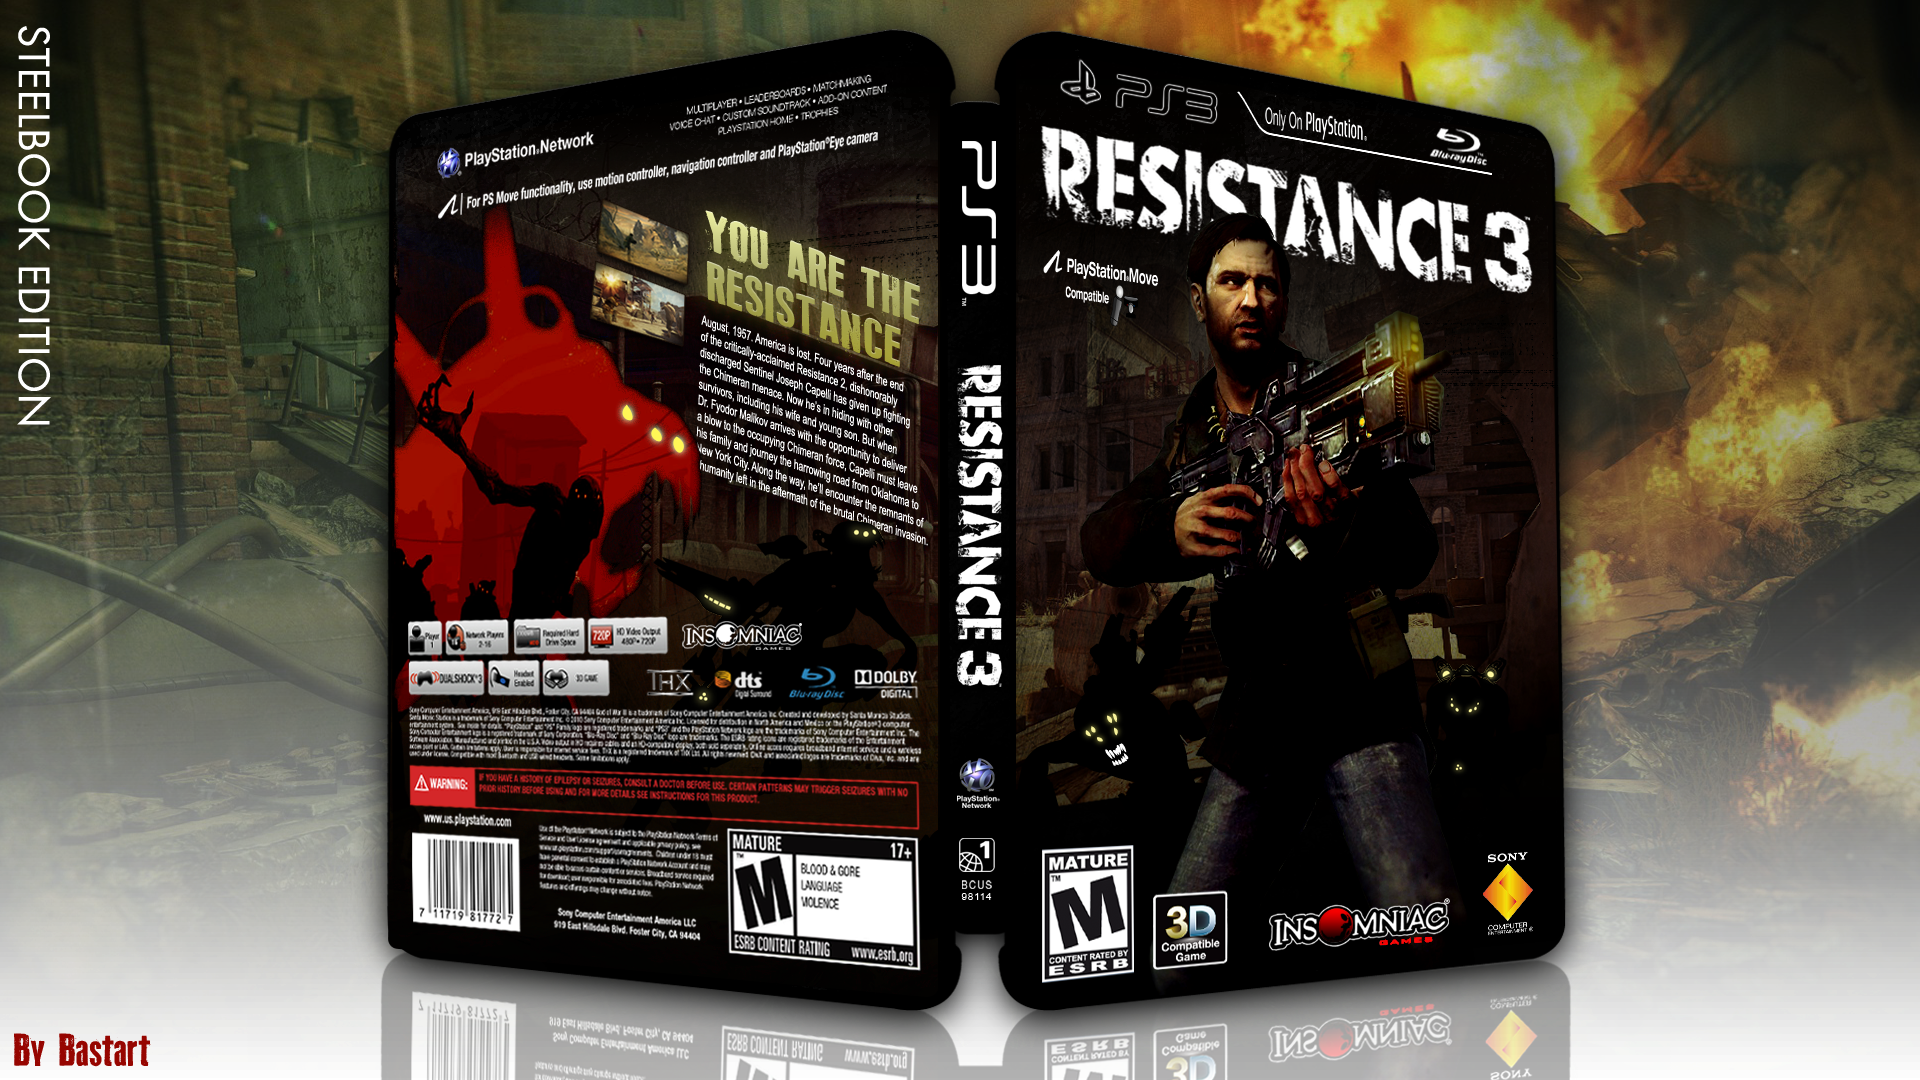 Resistance 3 (steelbook edition) box cover